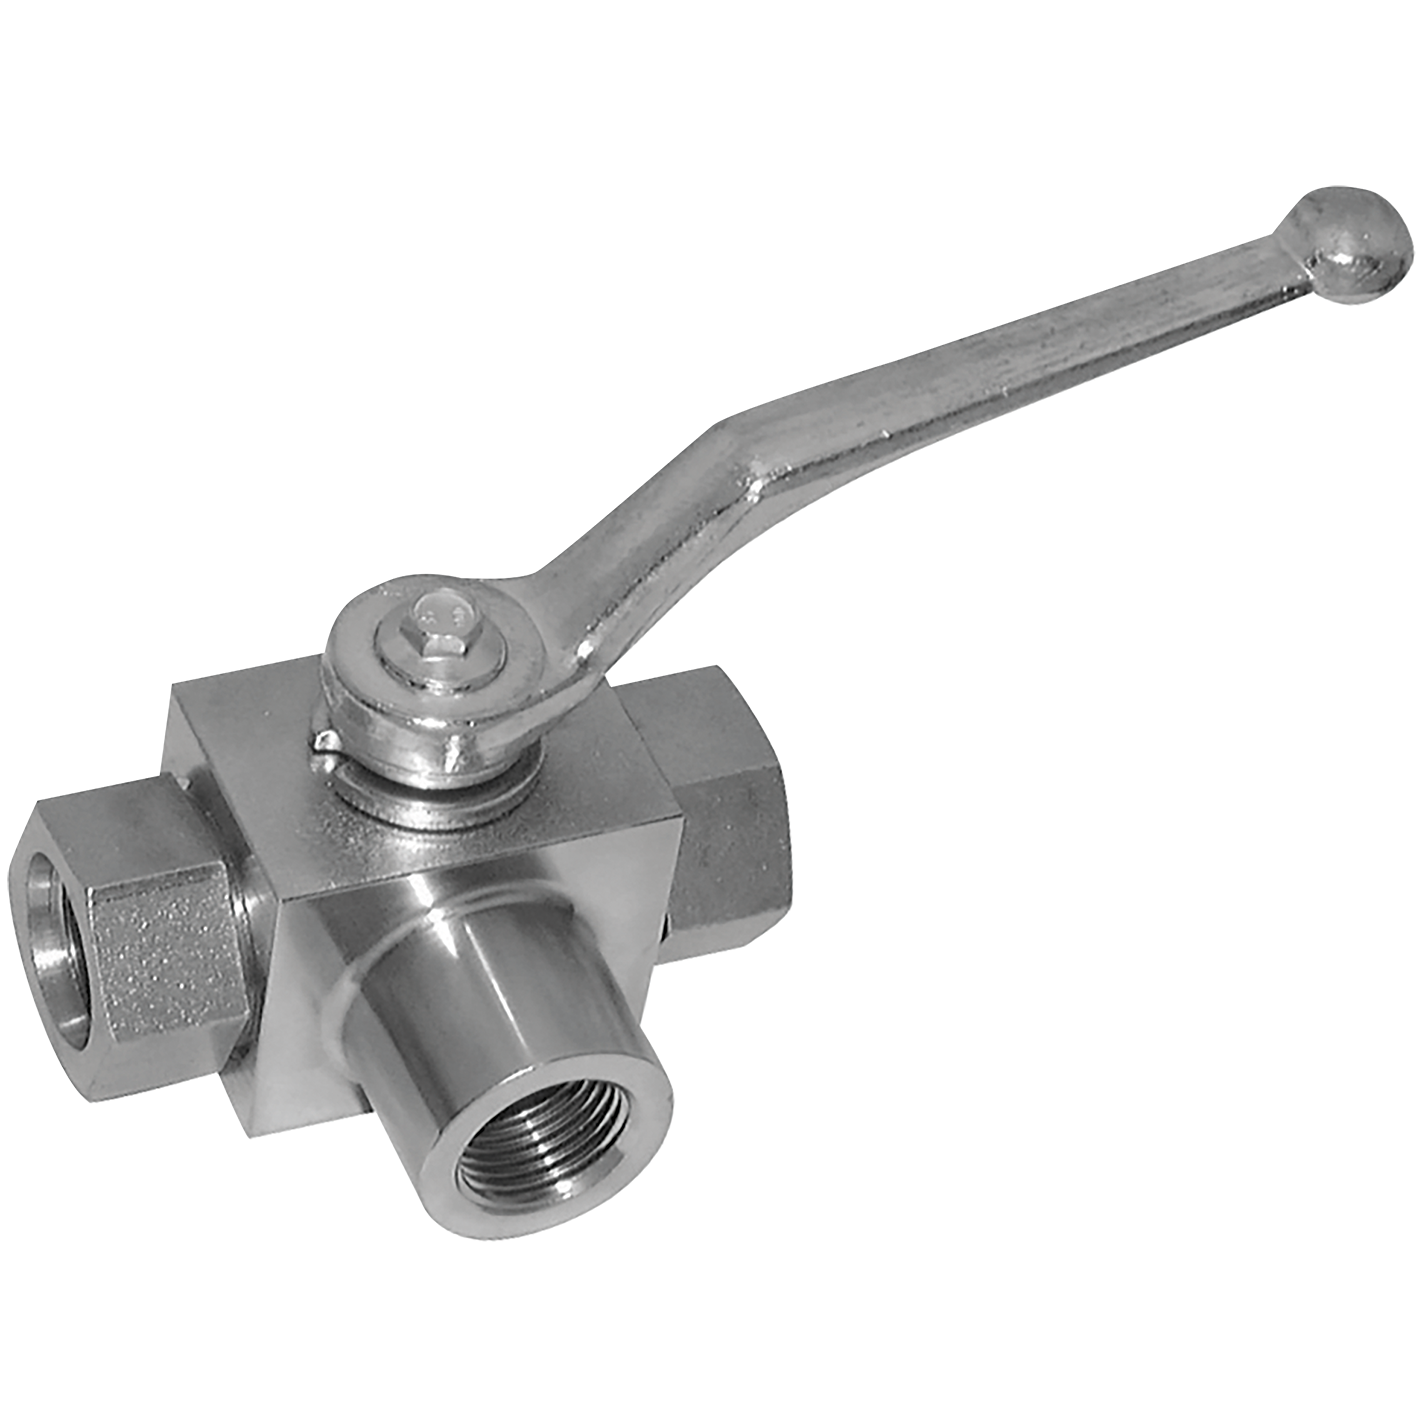 1.1/2" BSP Parallel Female 3 Way L Ported Ball Valve